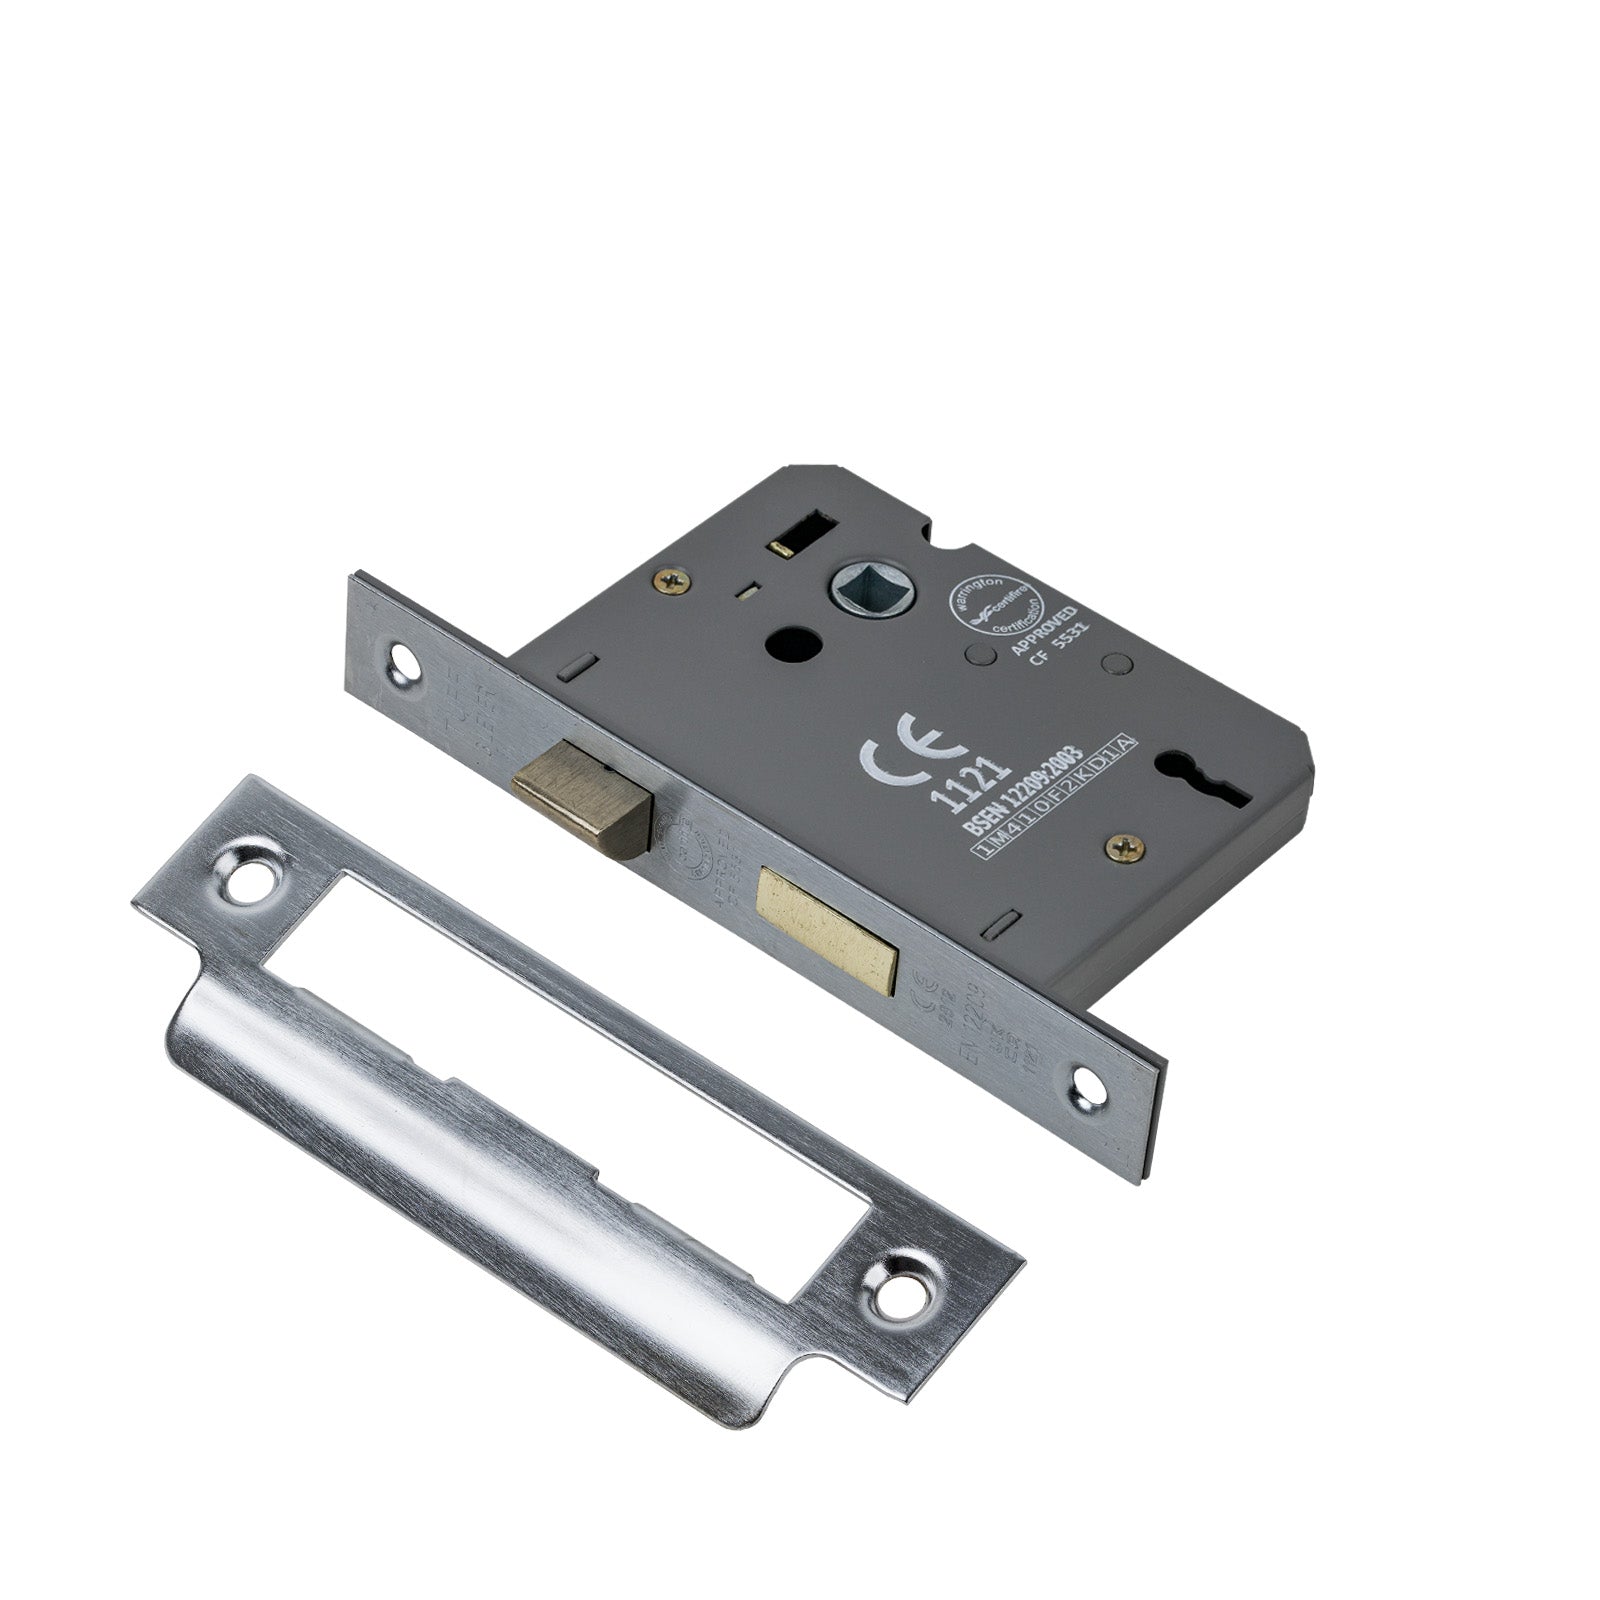 SHOW 3 Lever Sash Lock - 3 Inch with Satin Chrome finished forend and striker plate